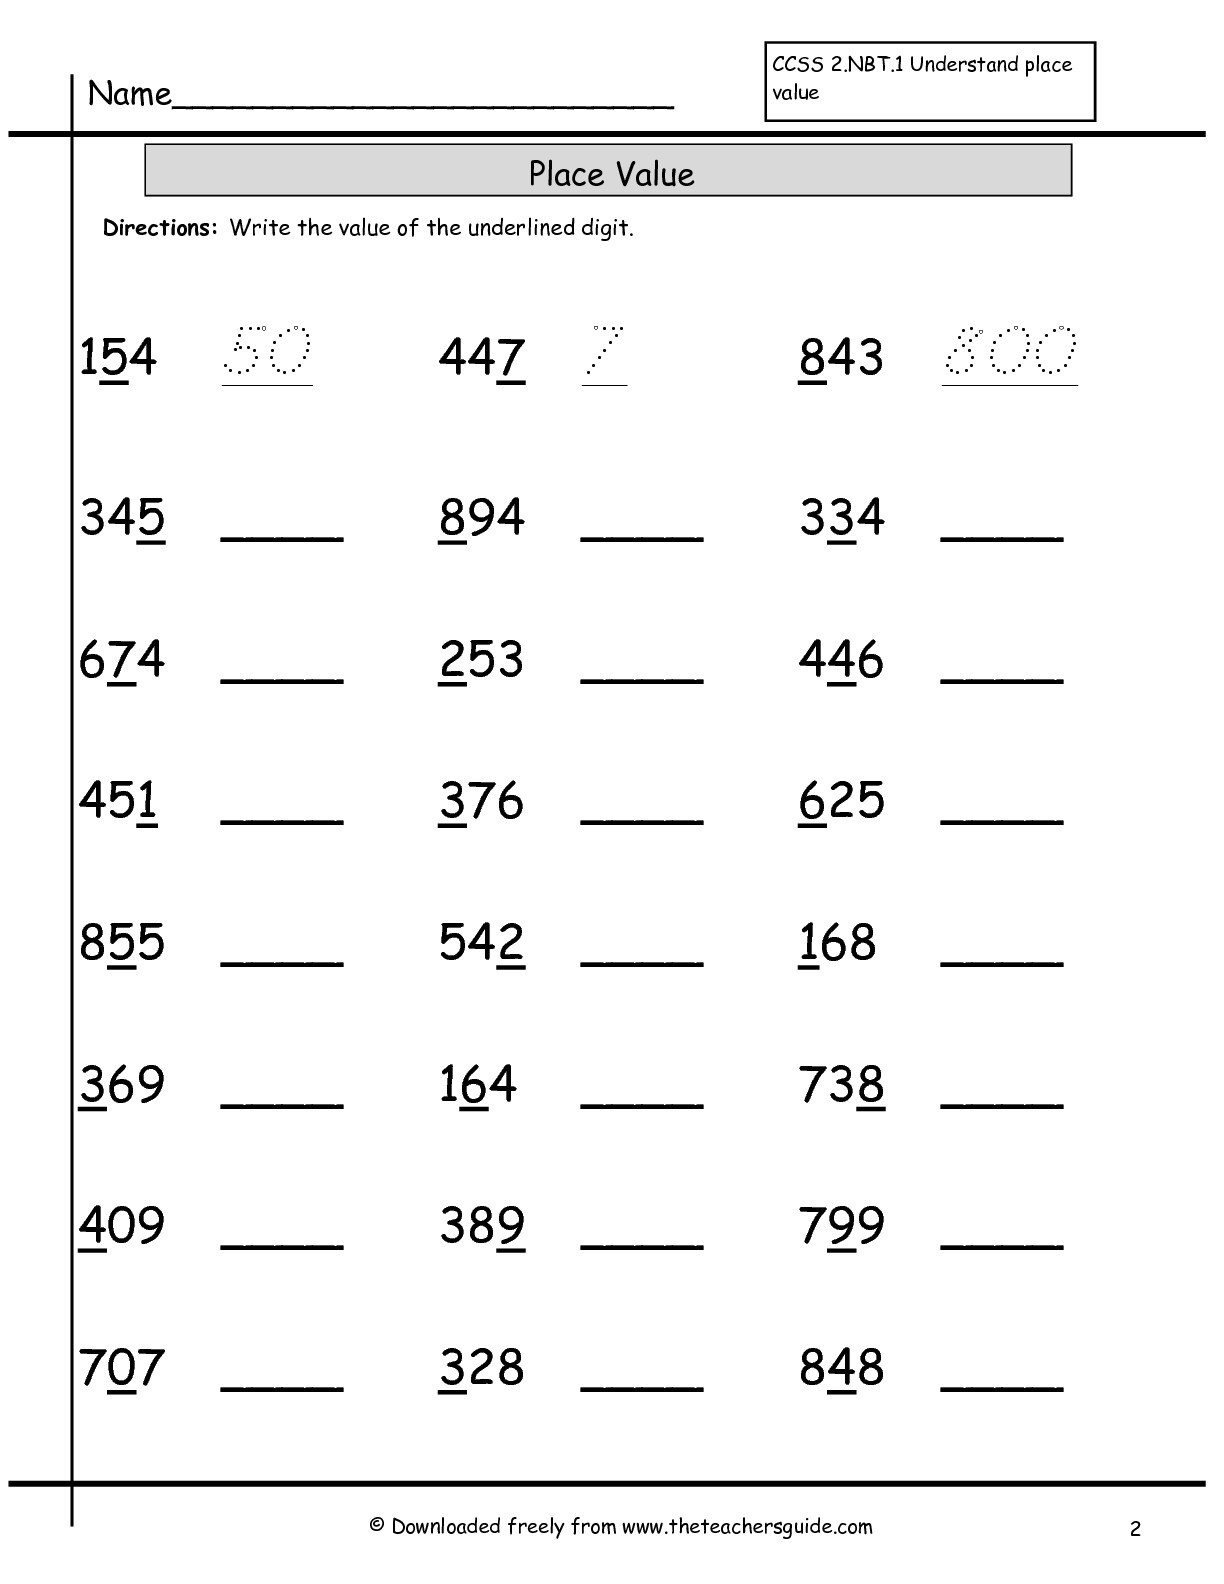 Place Value Worksheets From The Teacher&amp;#039;s Guide - Free Printable Place Value Worksheets